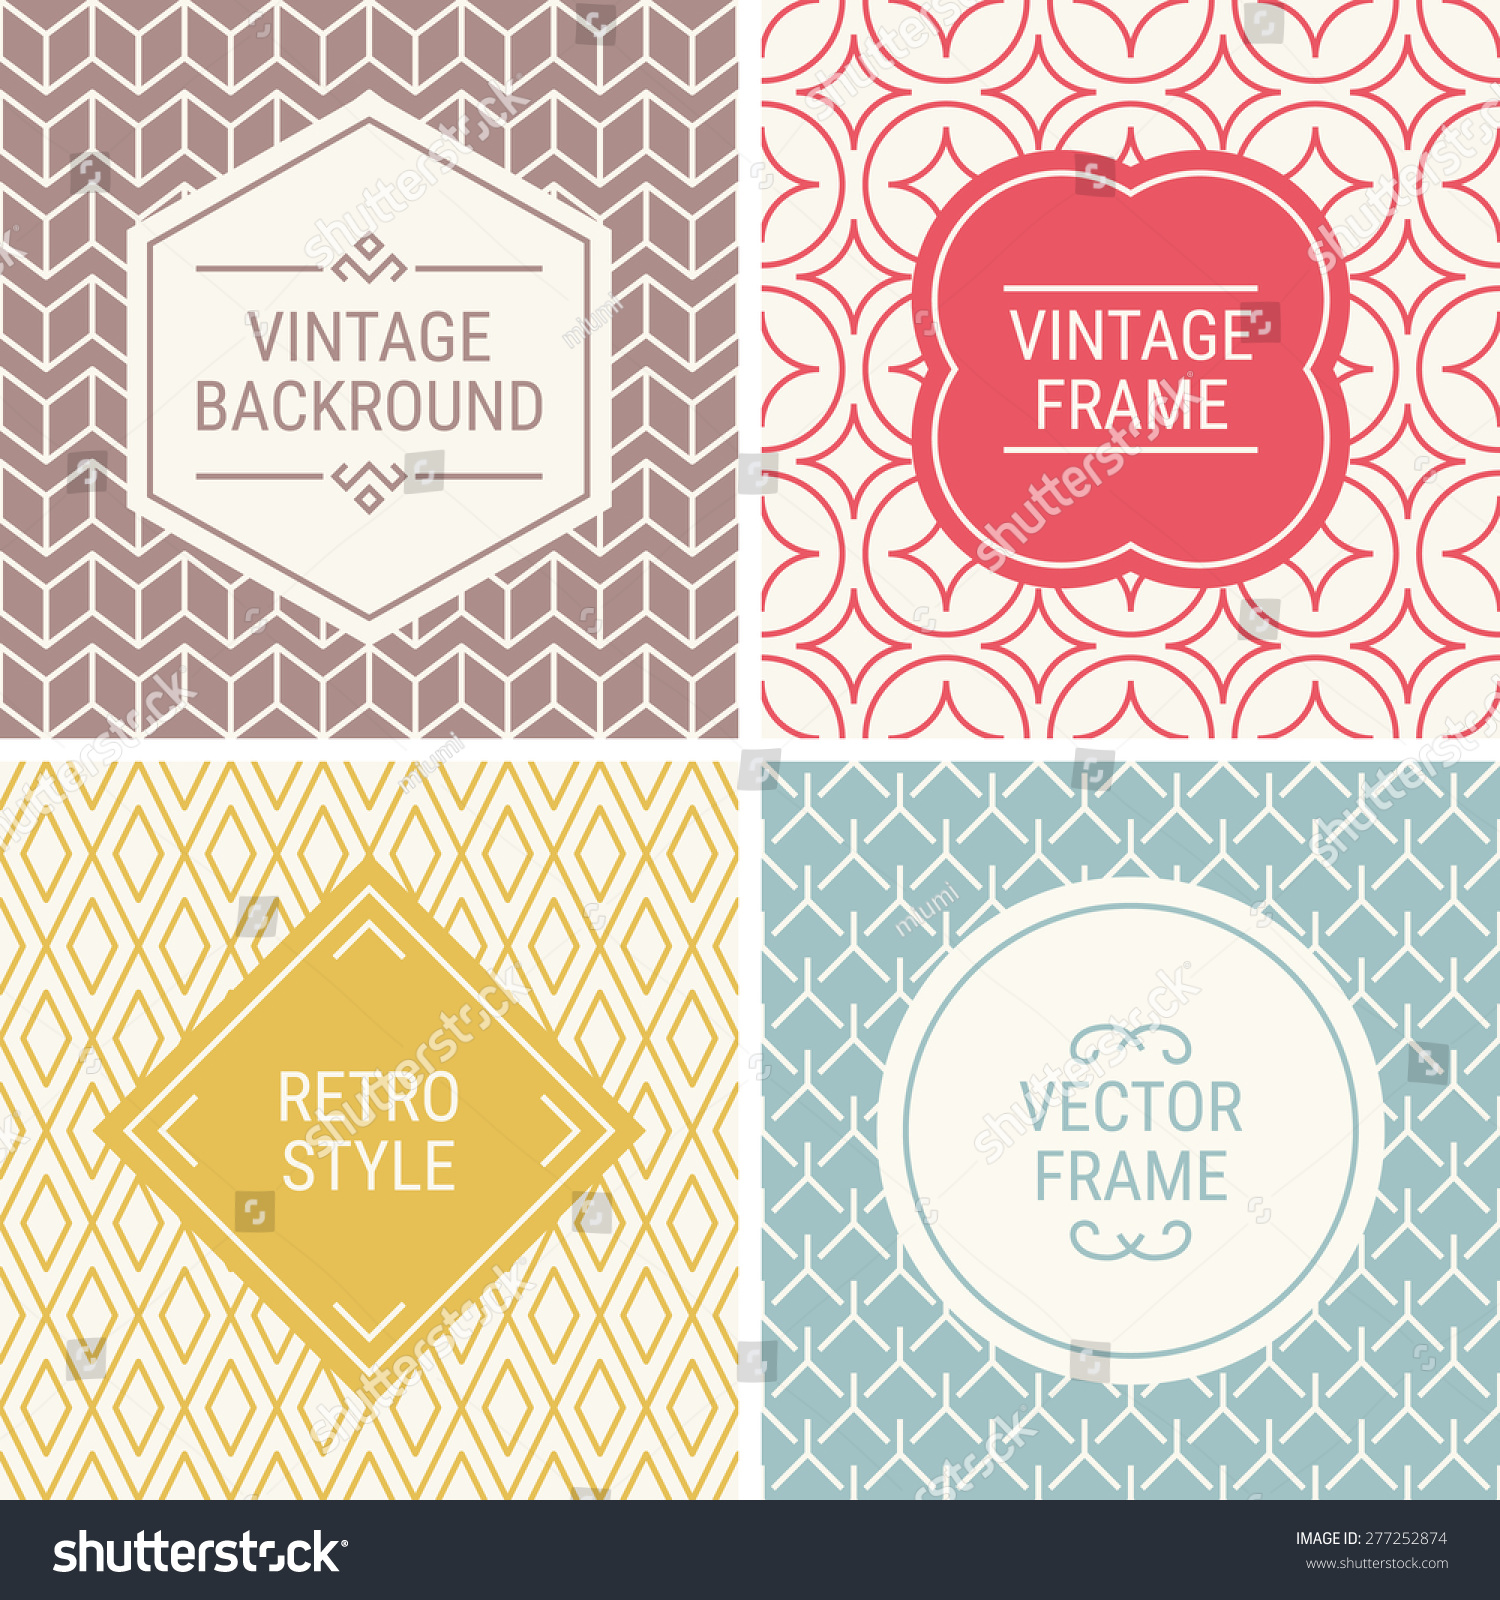 Set of vintage frames in Red, Gold, Blue, Brown and Beige on mono line seamless background. Perfect for greeting cards, wedding invitations, retro parties. Vector labels and badges #277252874